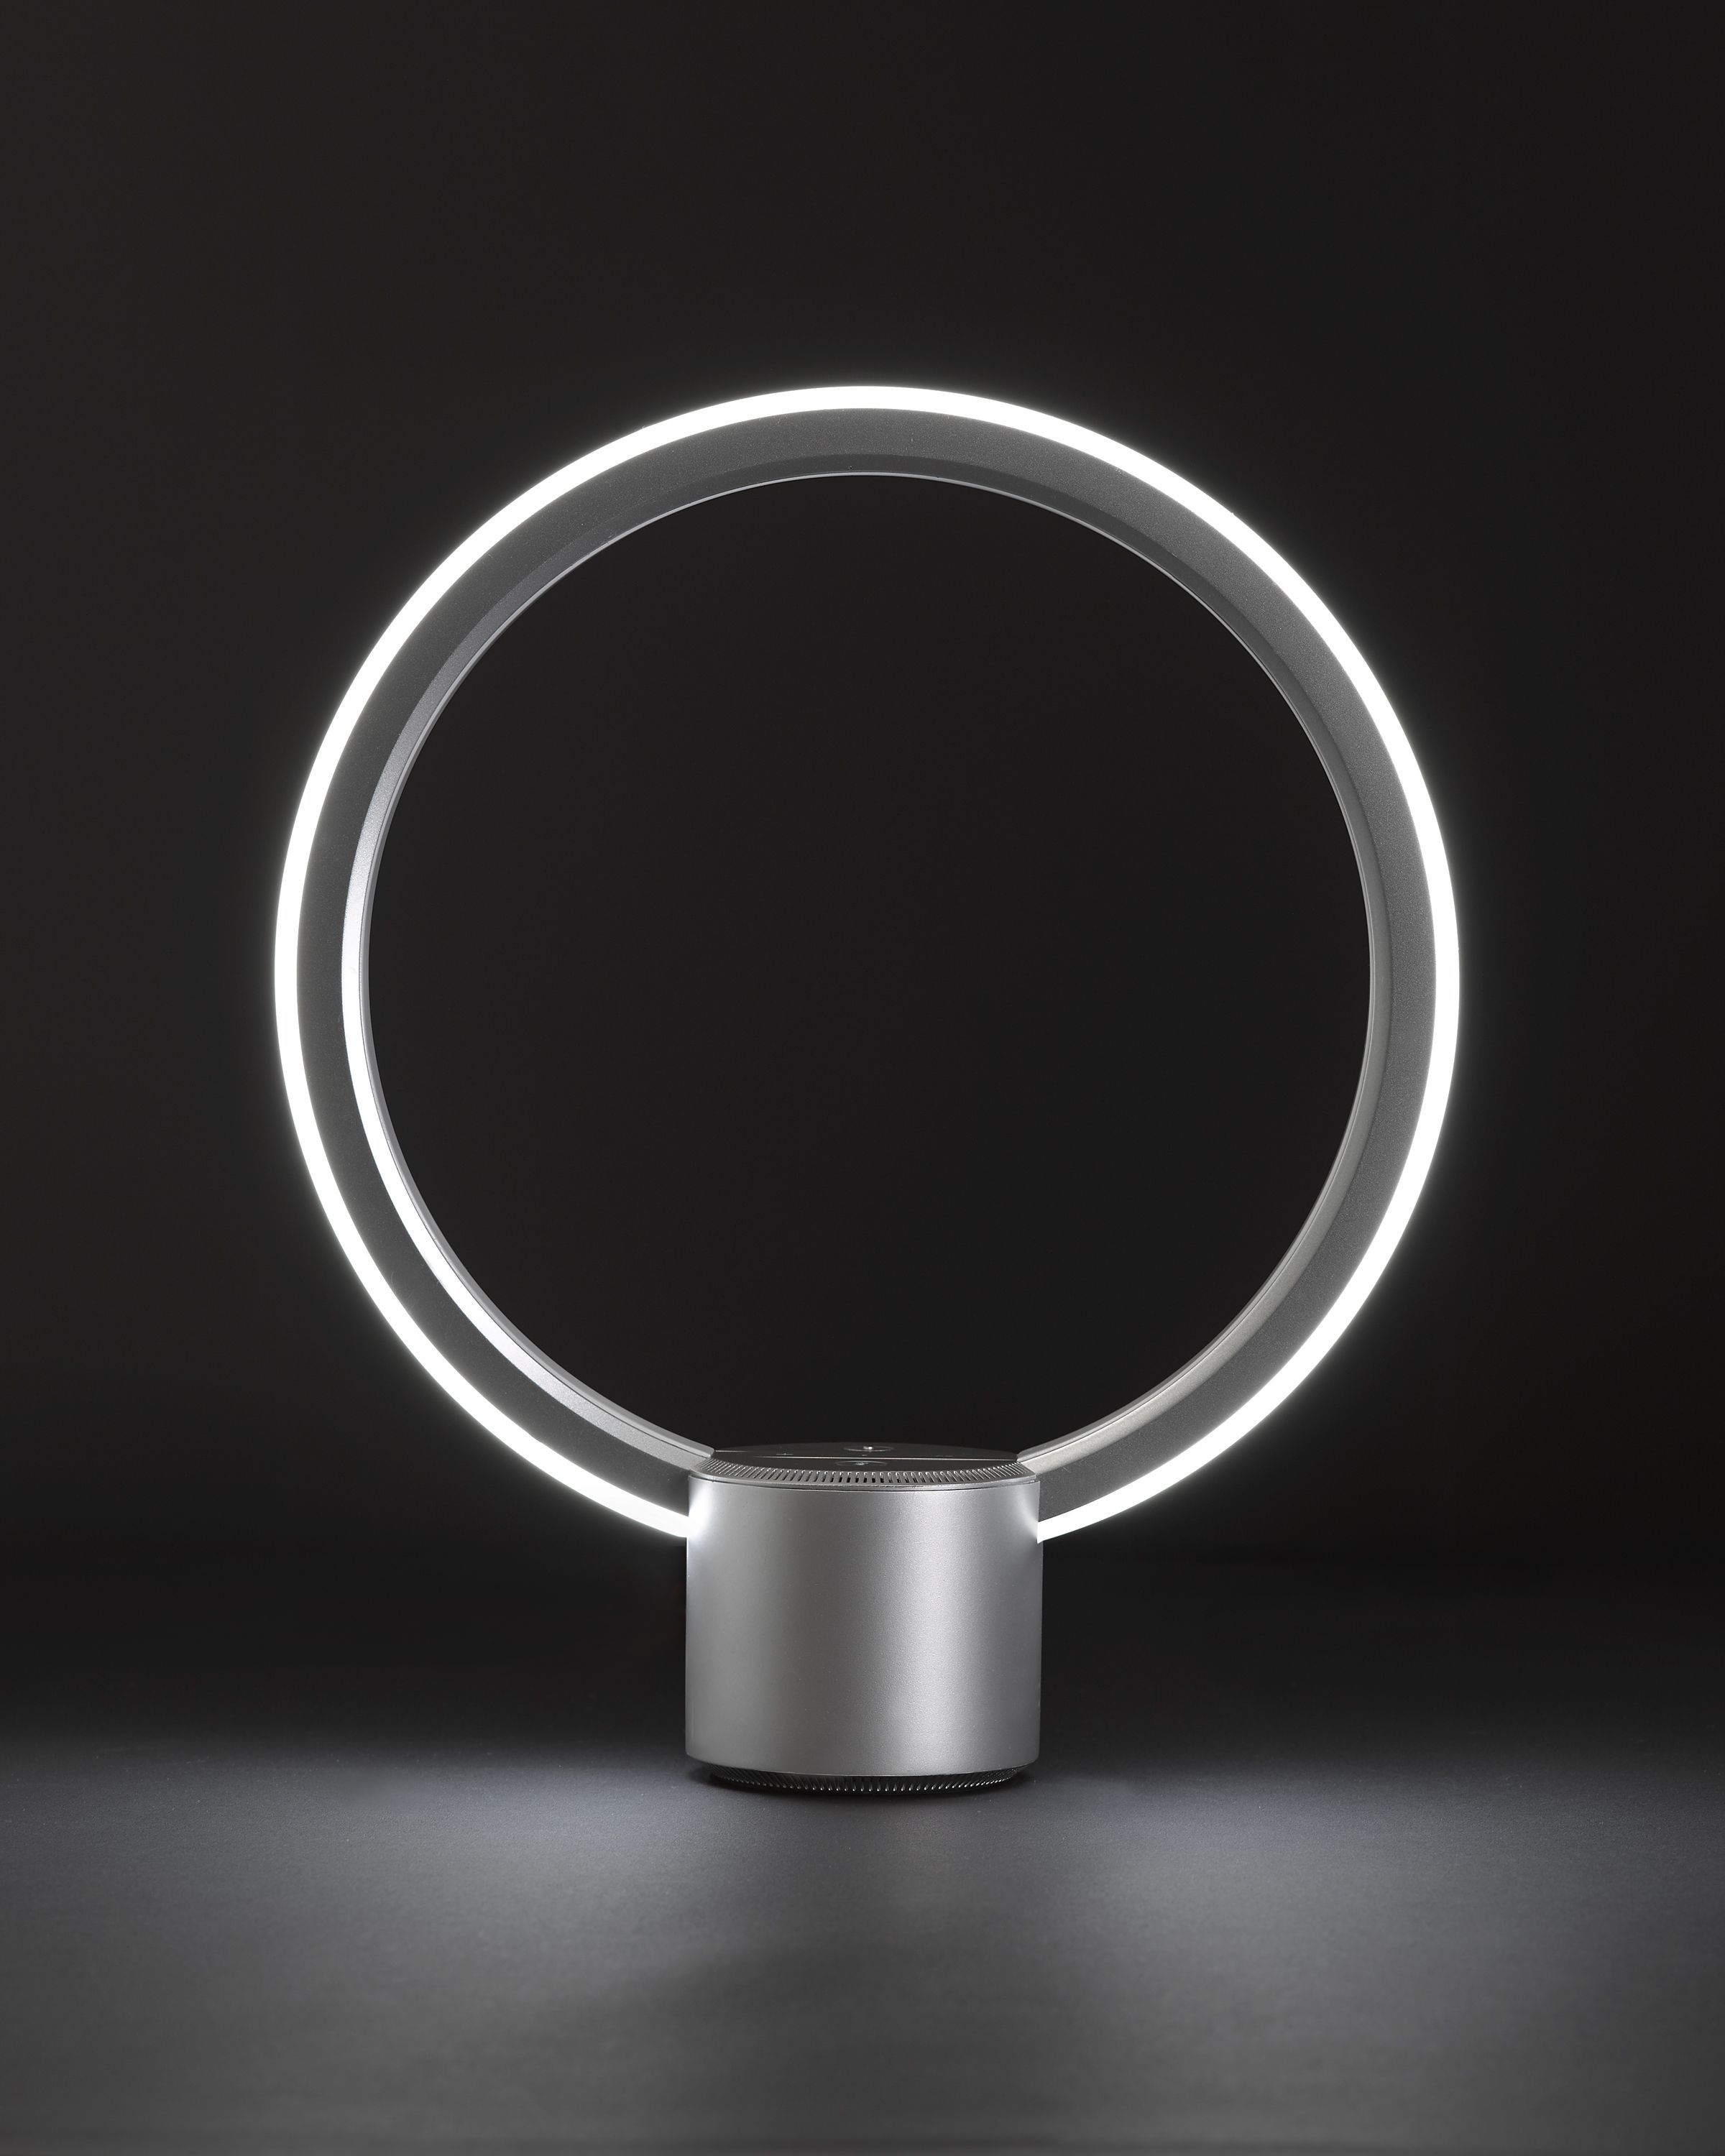 Alexa-enabled C by GE Sol voice-interactive smart lamp